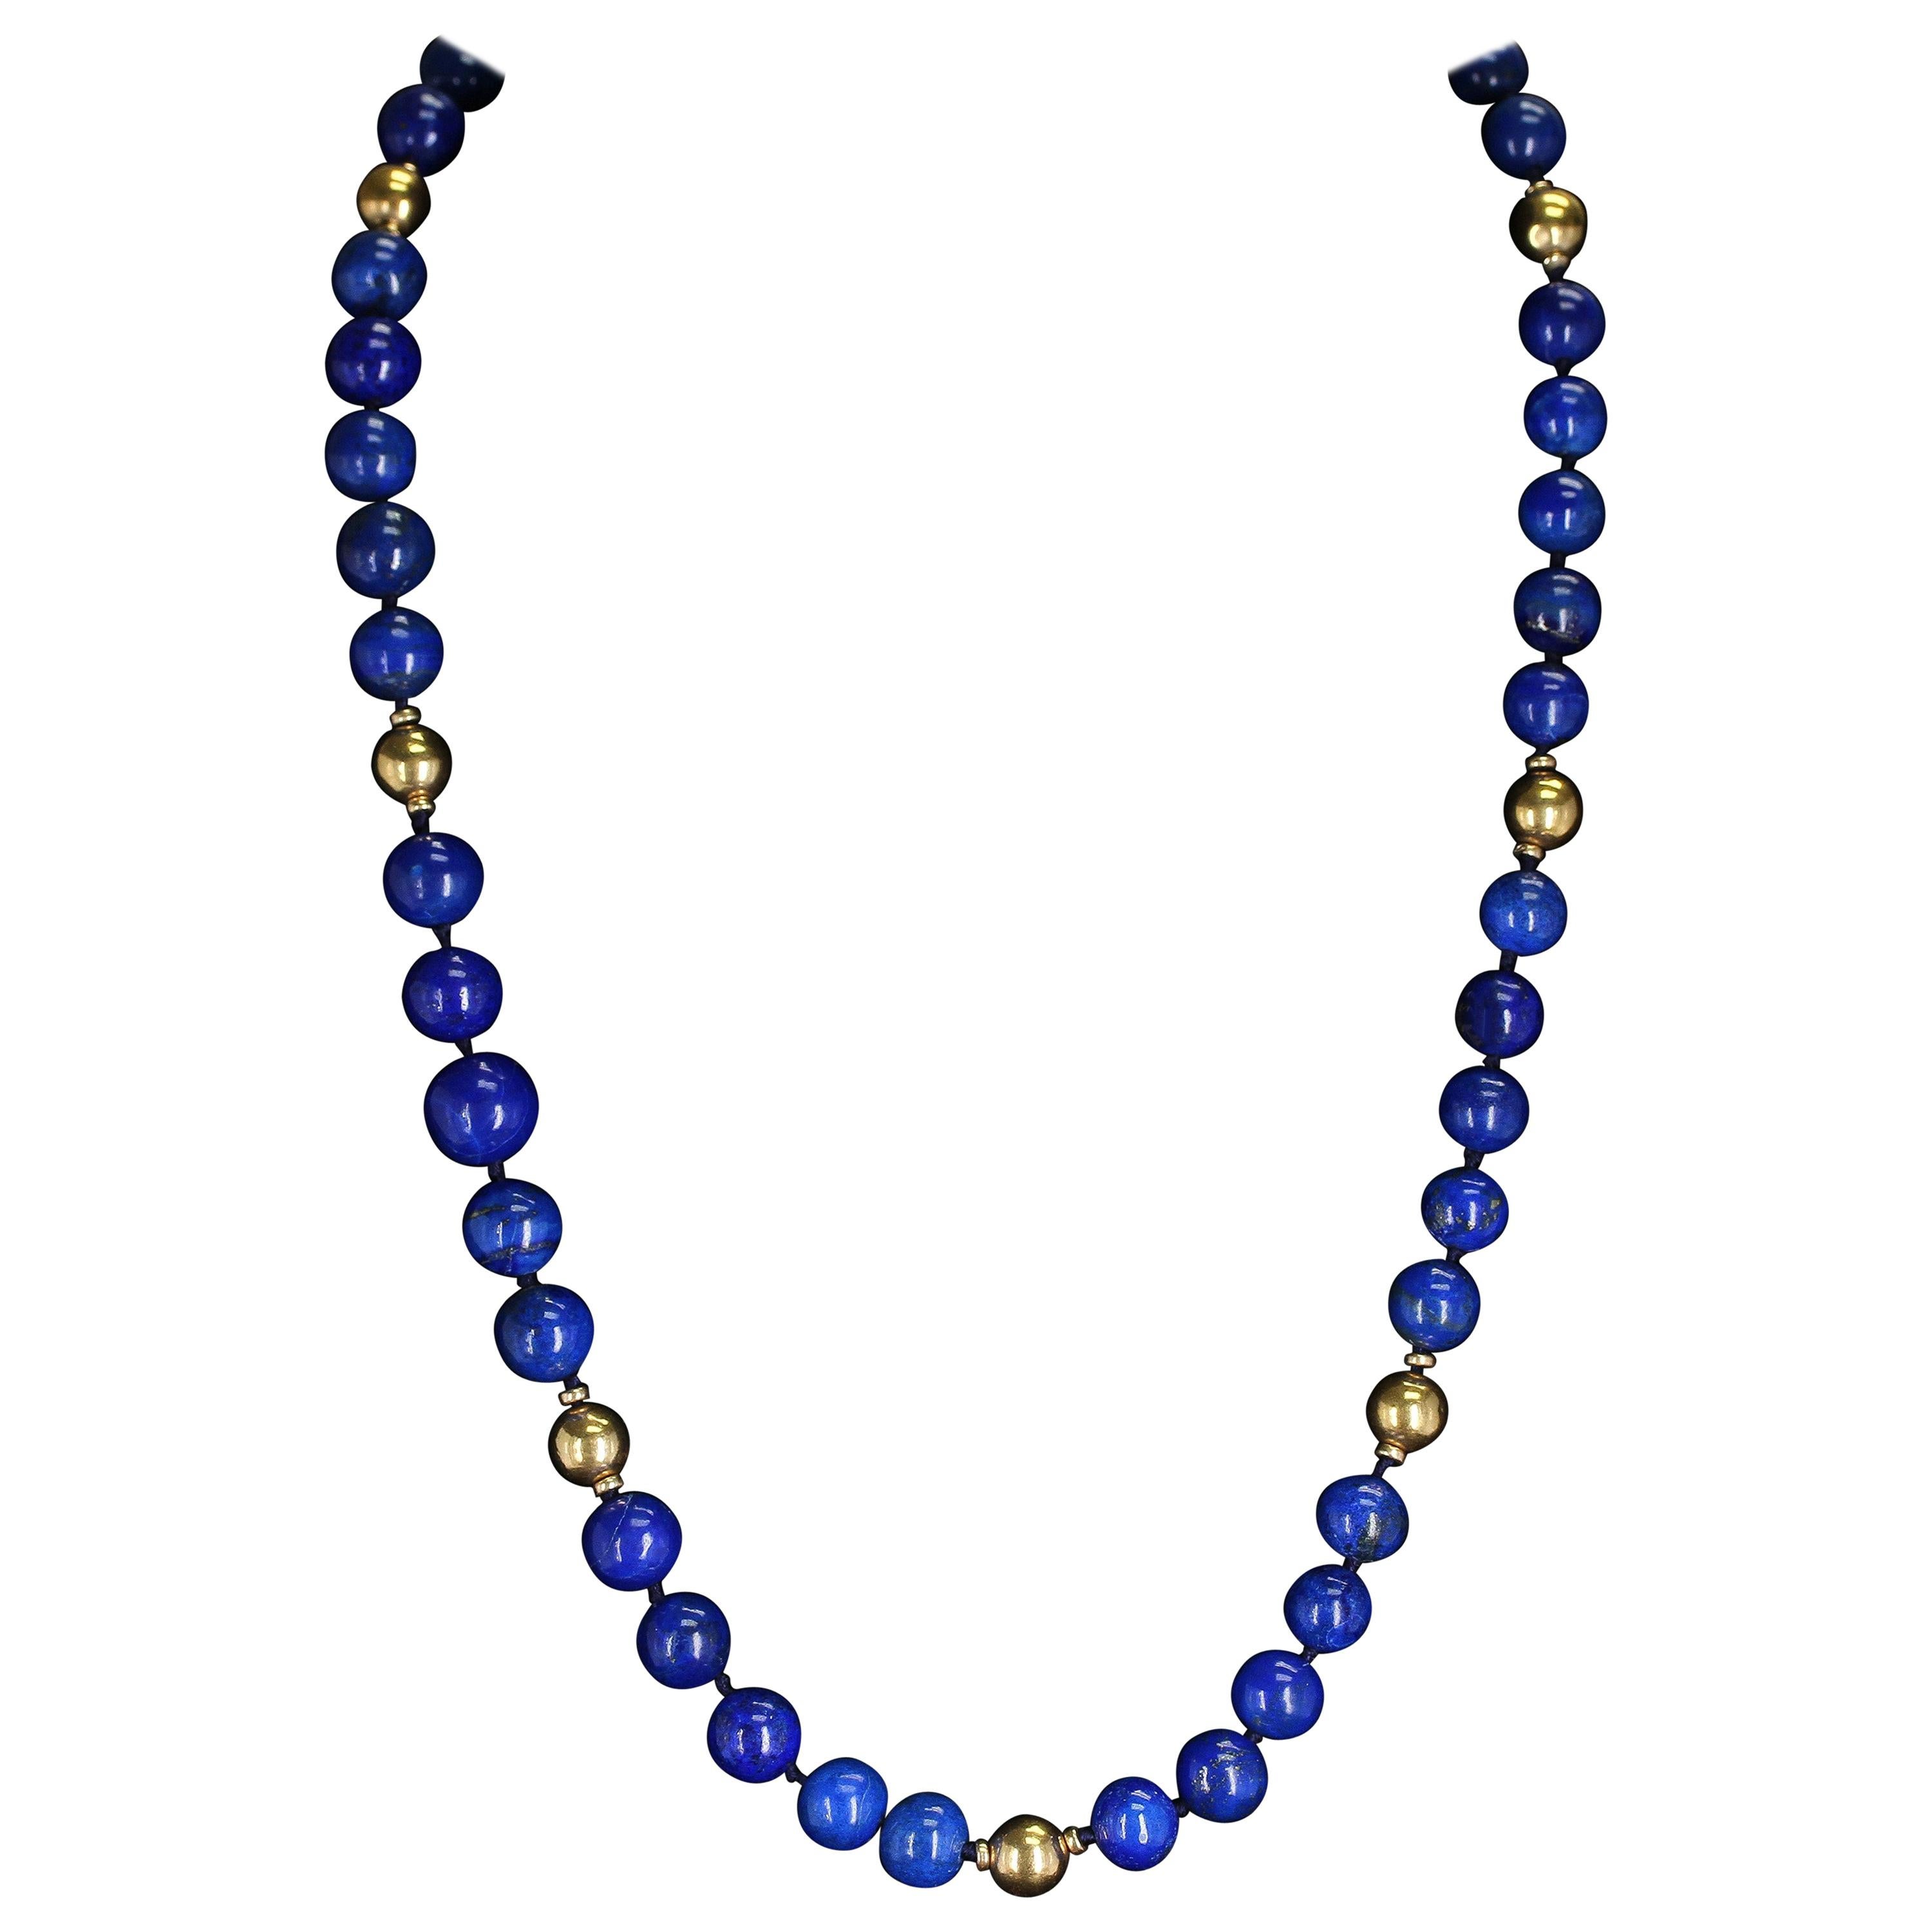 Large and Round Lapis Lazuli Beads and Gold Beads Necklace